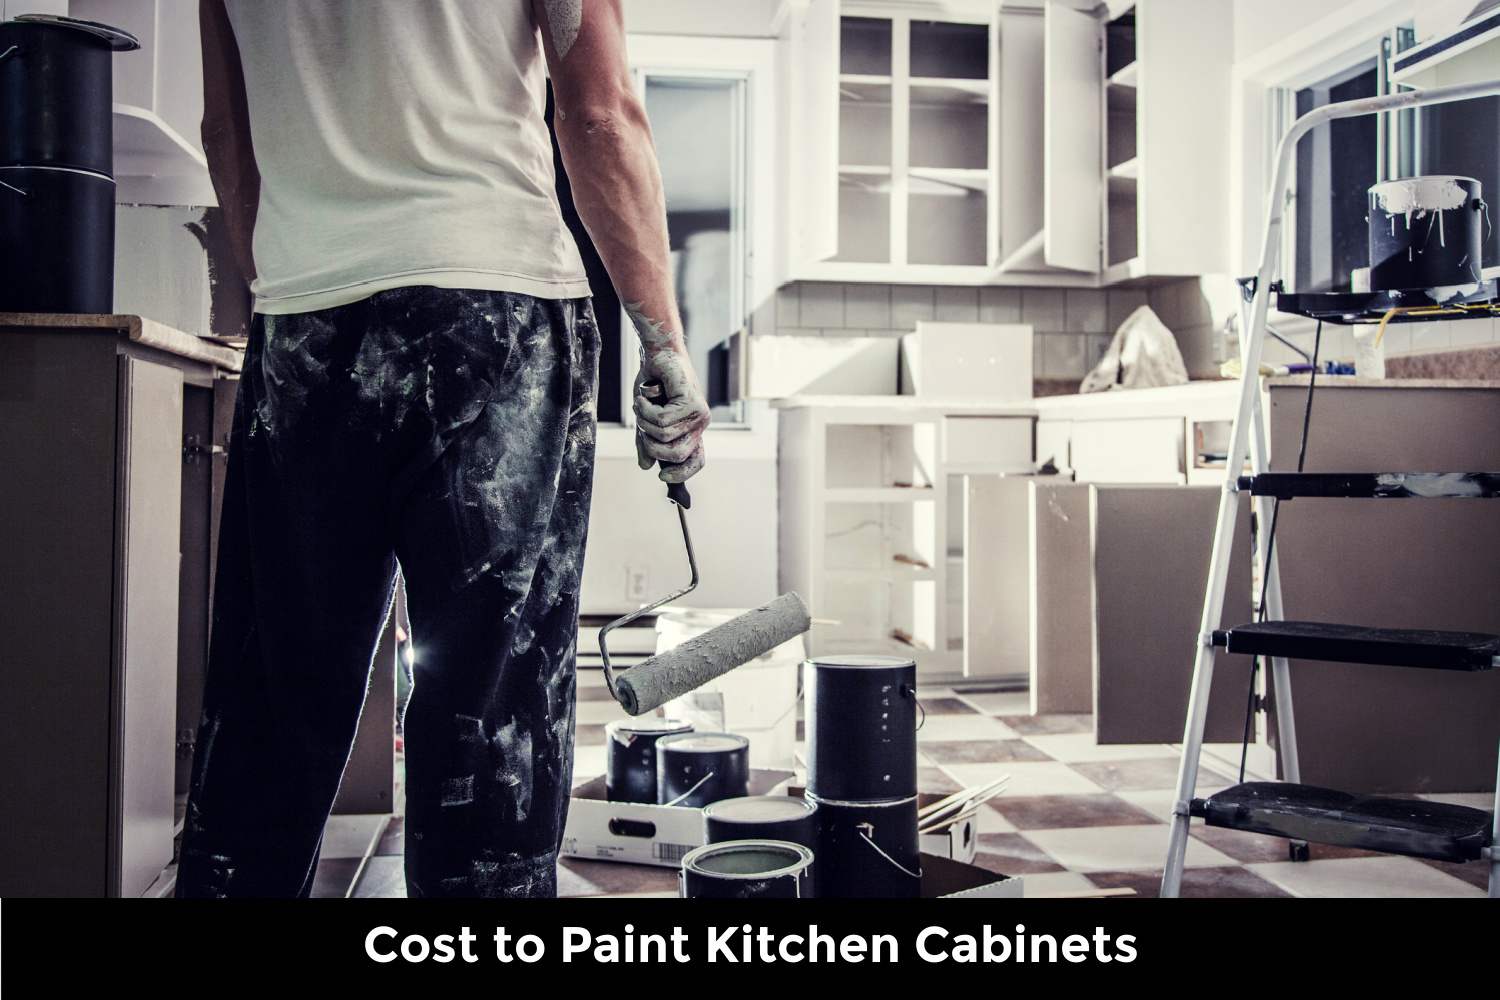 What’s the Cost to Paint Kitchen Cabinets?